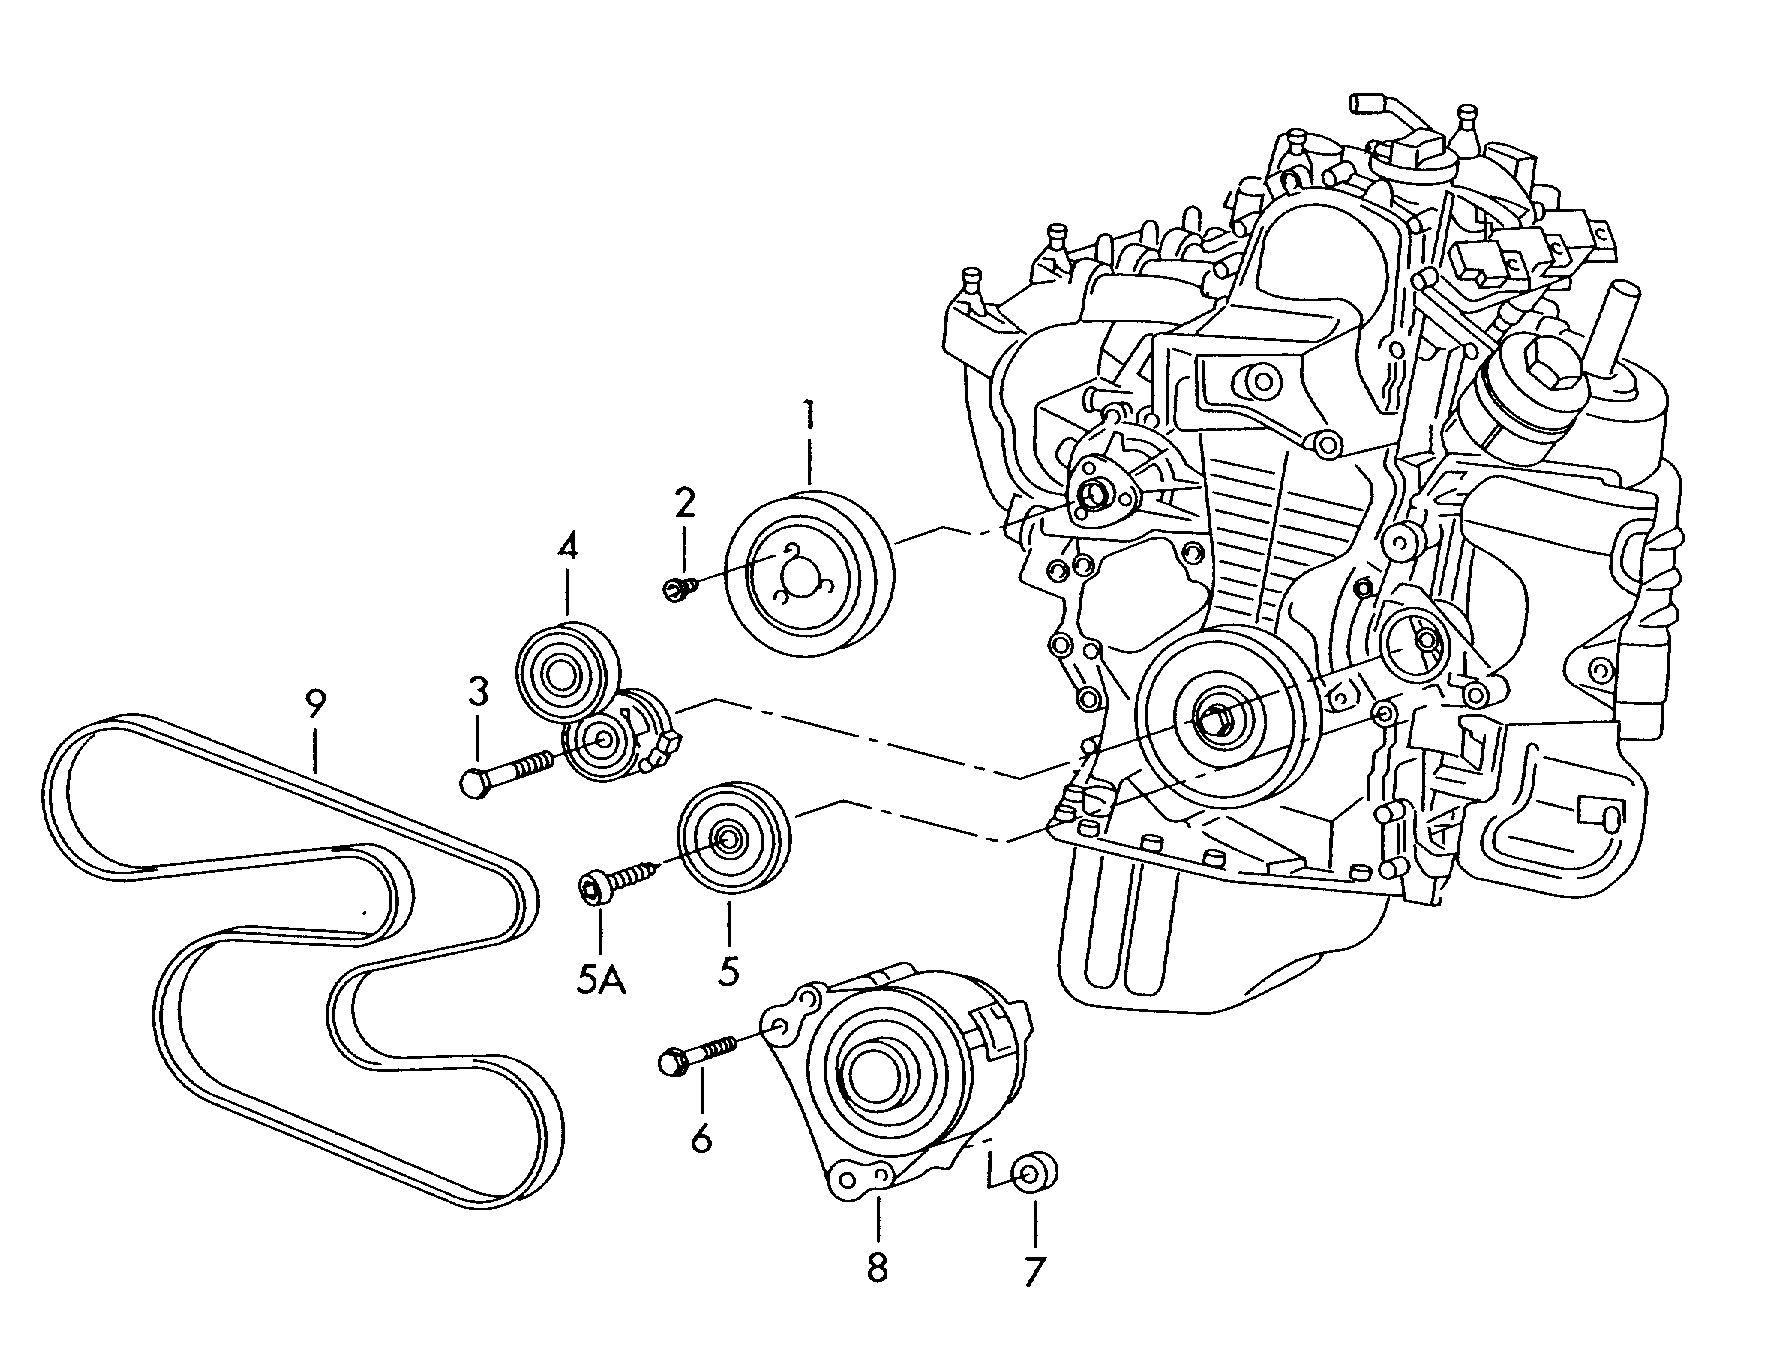 connecting and mounting parts<br>for alternatorPoly-V-belt 1.2 Ltr. - Fabia - fabi